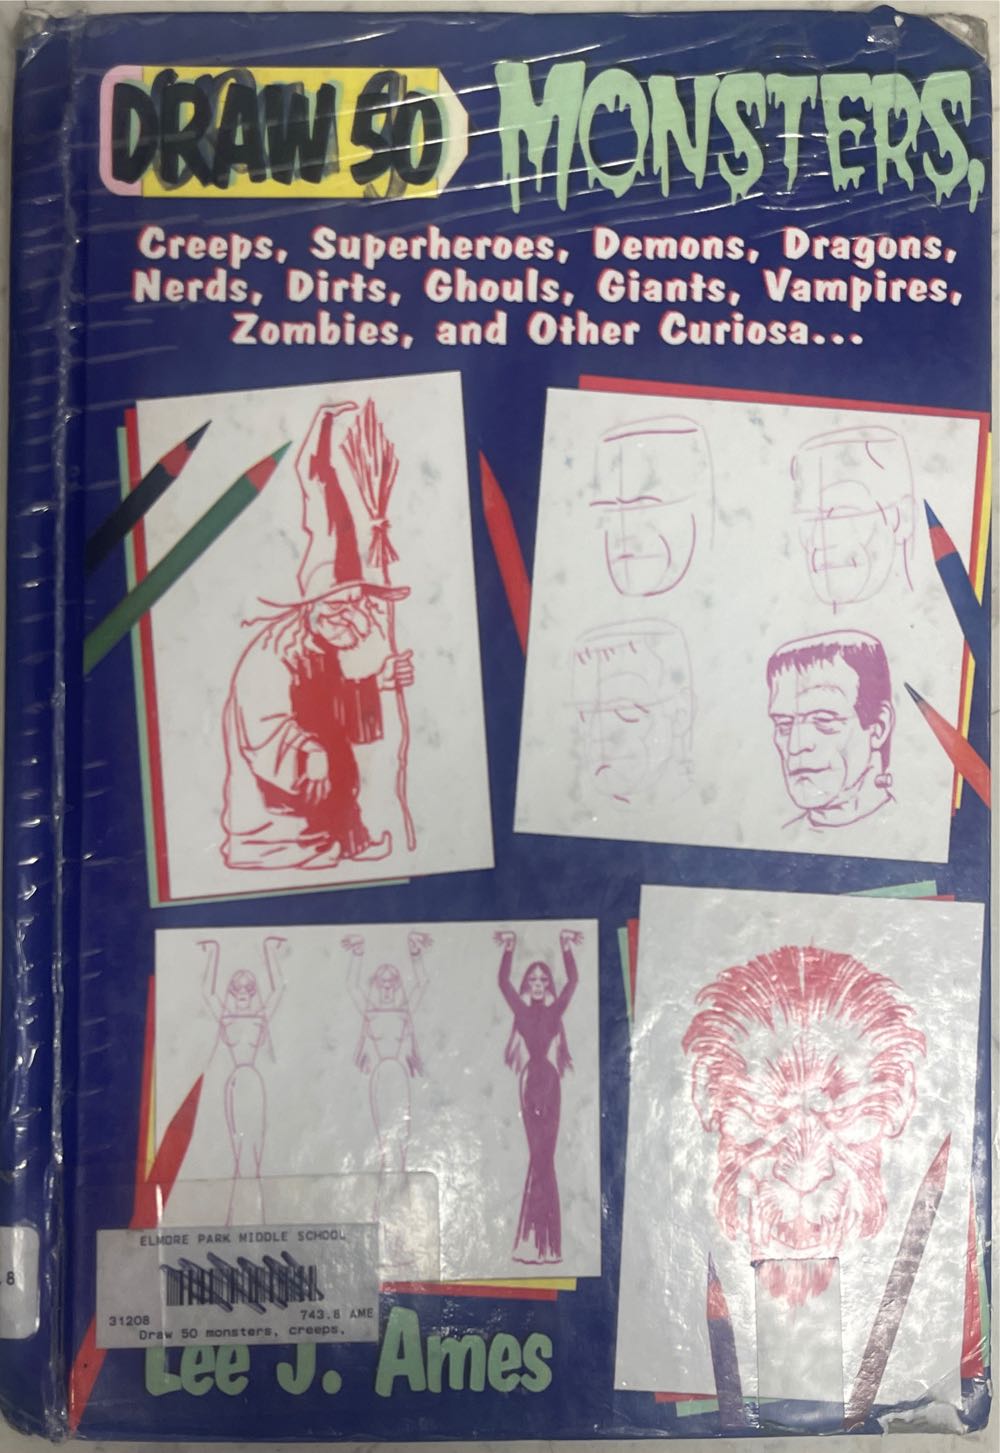 Draw 50 Monsters, Creeps, Superheroes, Demons, Dragons, Nerds, Dirts, Ghouls, Giants, Vampires, Zombies, and Other Curiosa ... - Lee J. Ames book collectible [Barcode 9780329049508] - Main Image 1